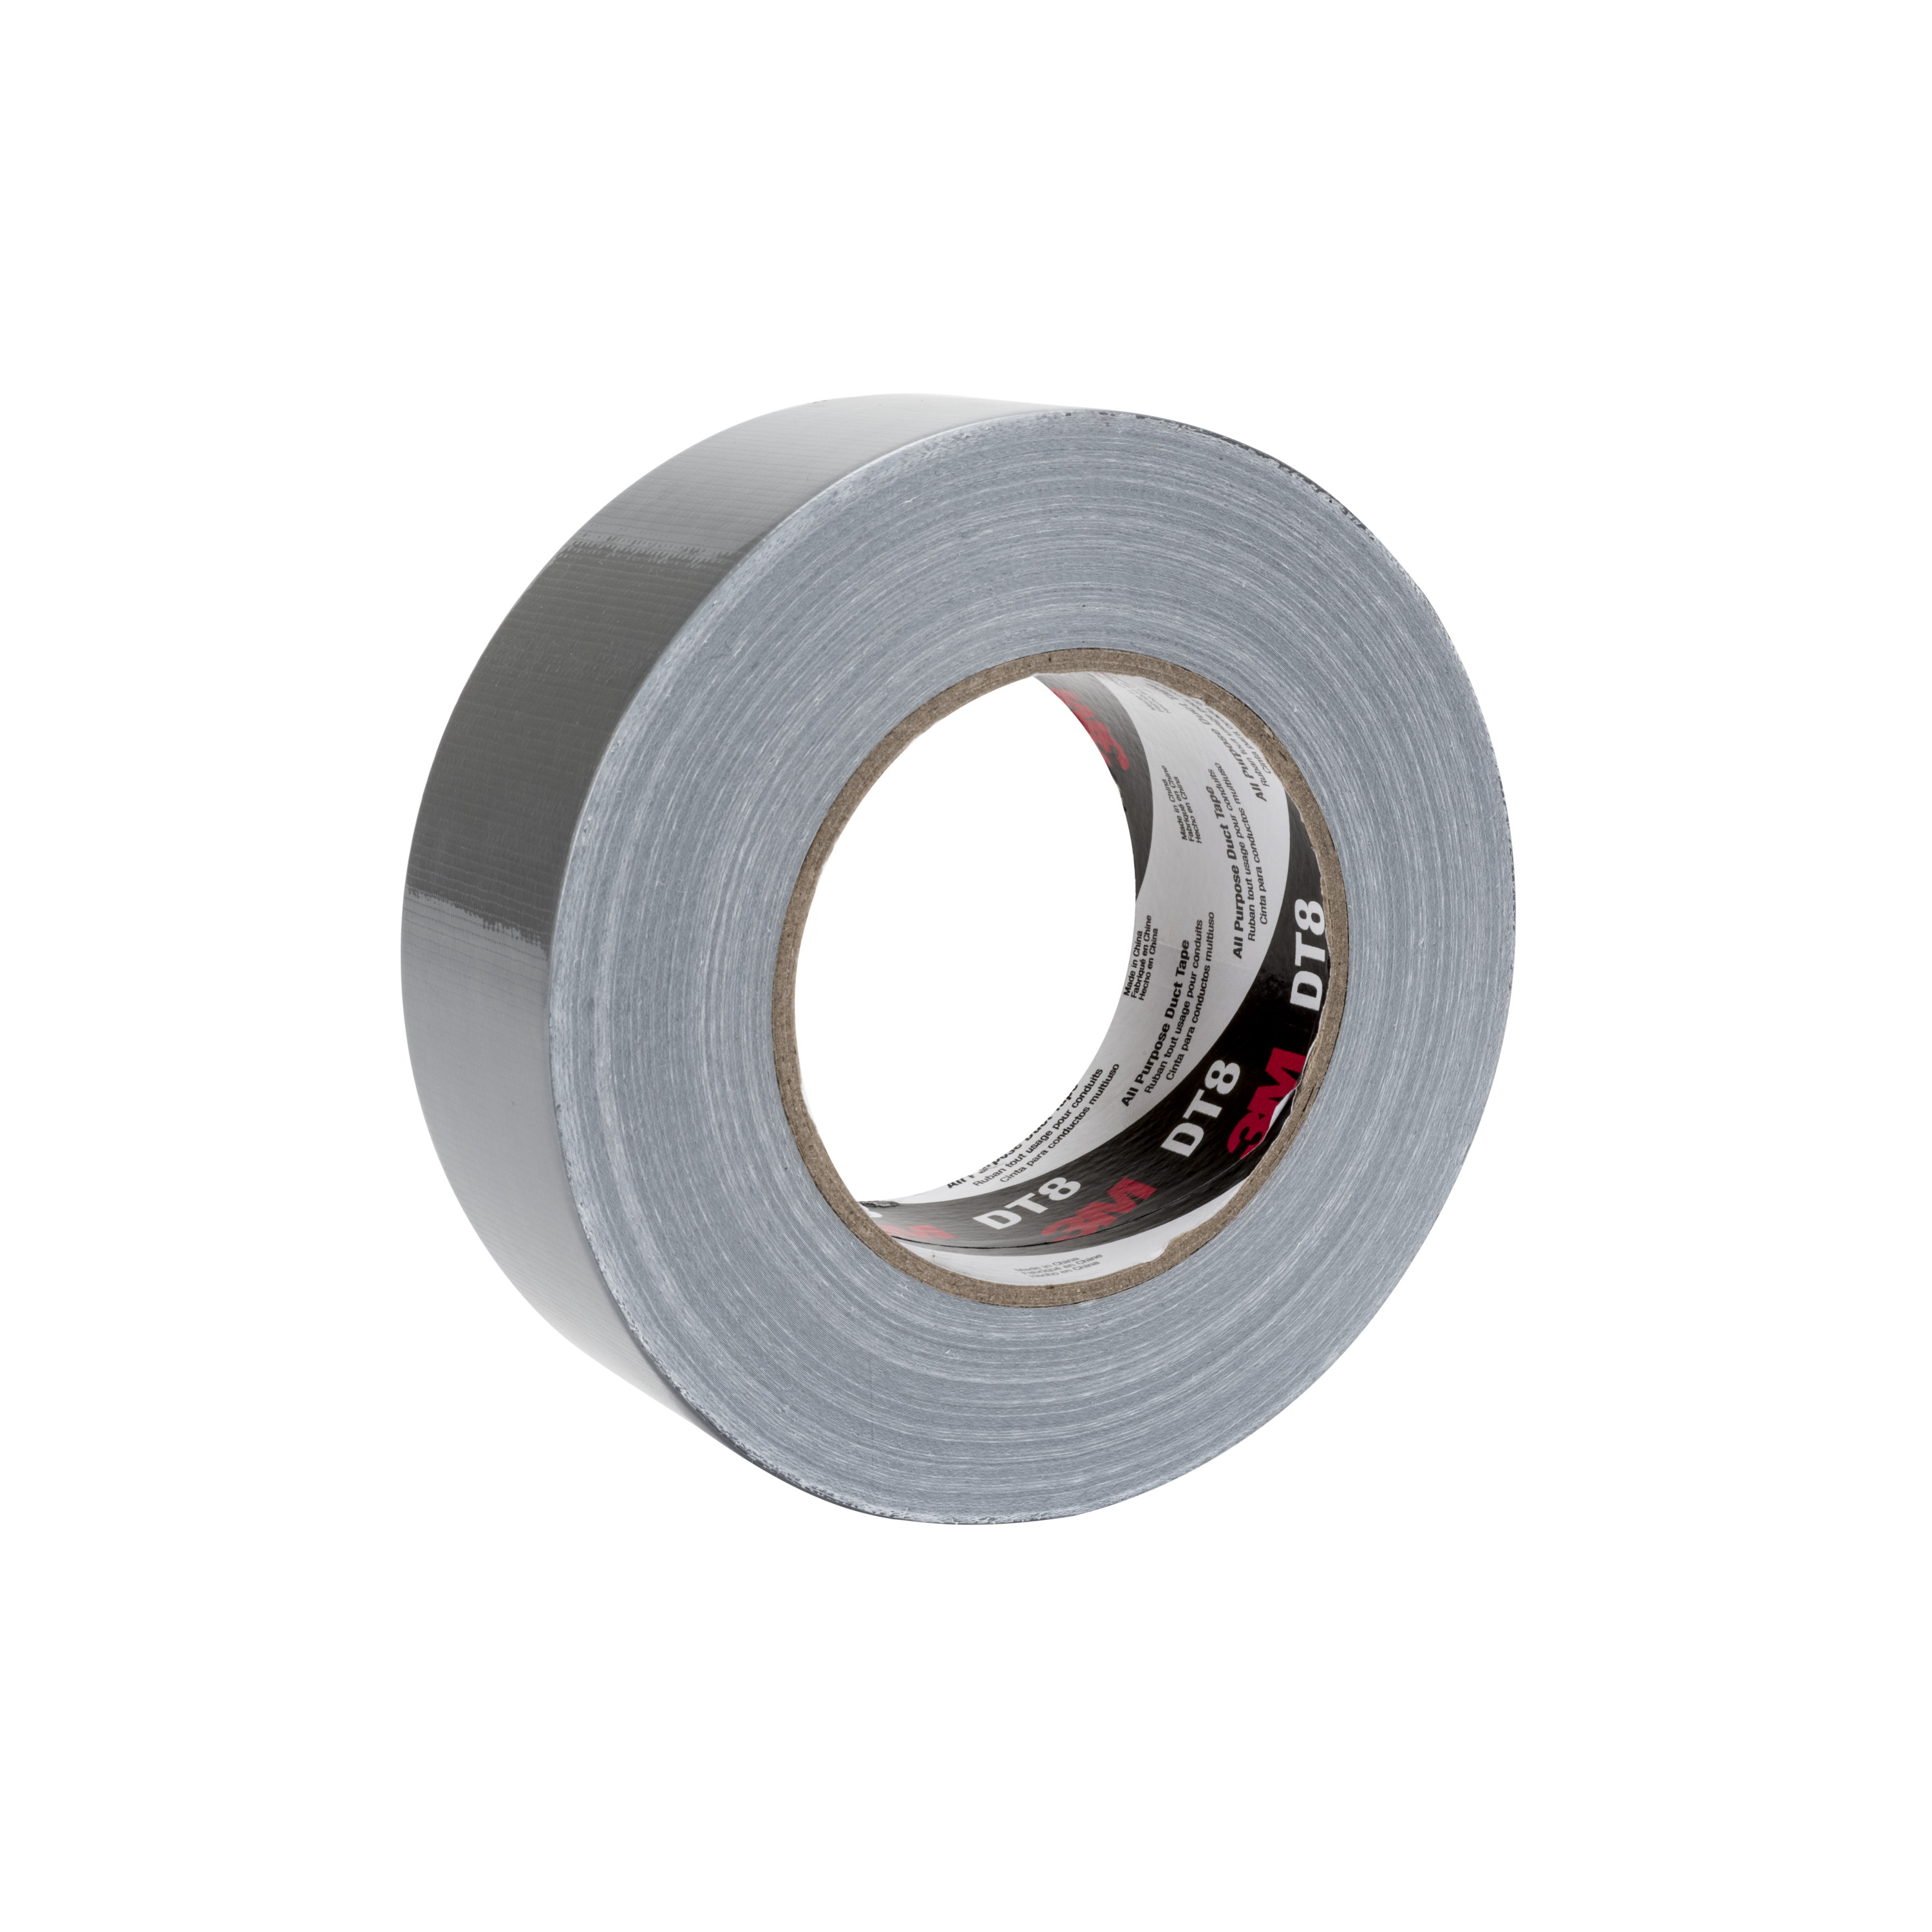 3M™ All Purpose Duct Tape DT8, Silver, 48 mm x 54.8 m, 8 mil, 24
rolls per case, Individually Wrapped Conveniently Packaged